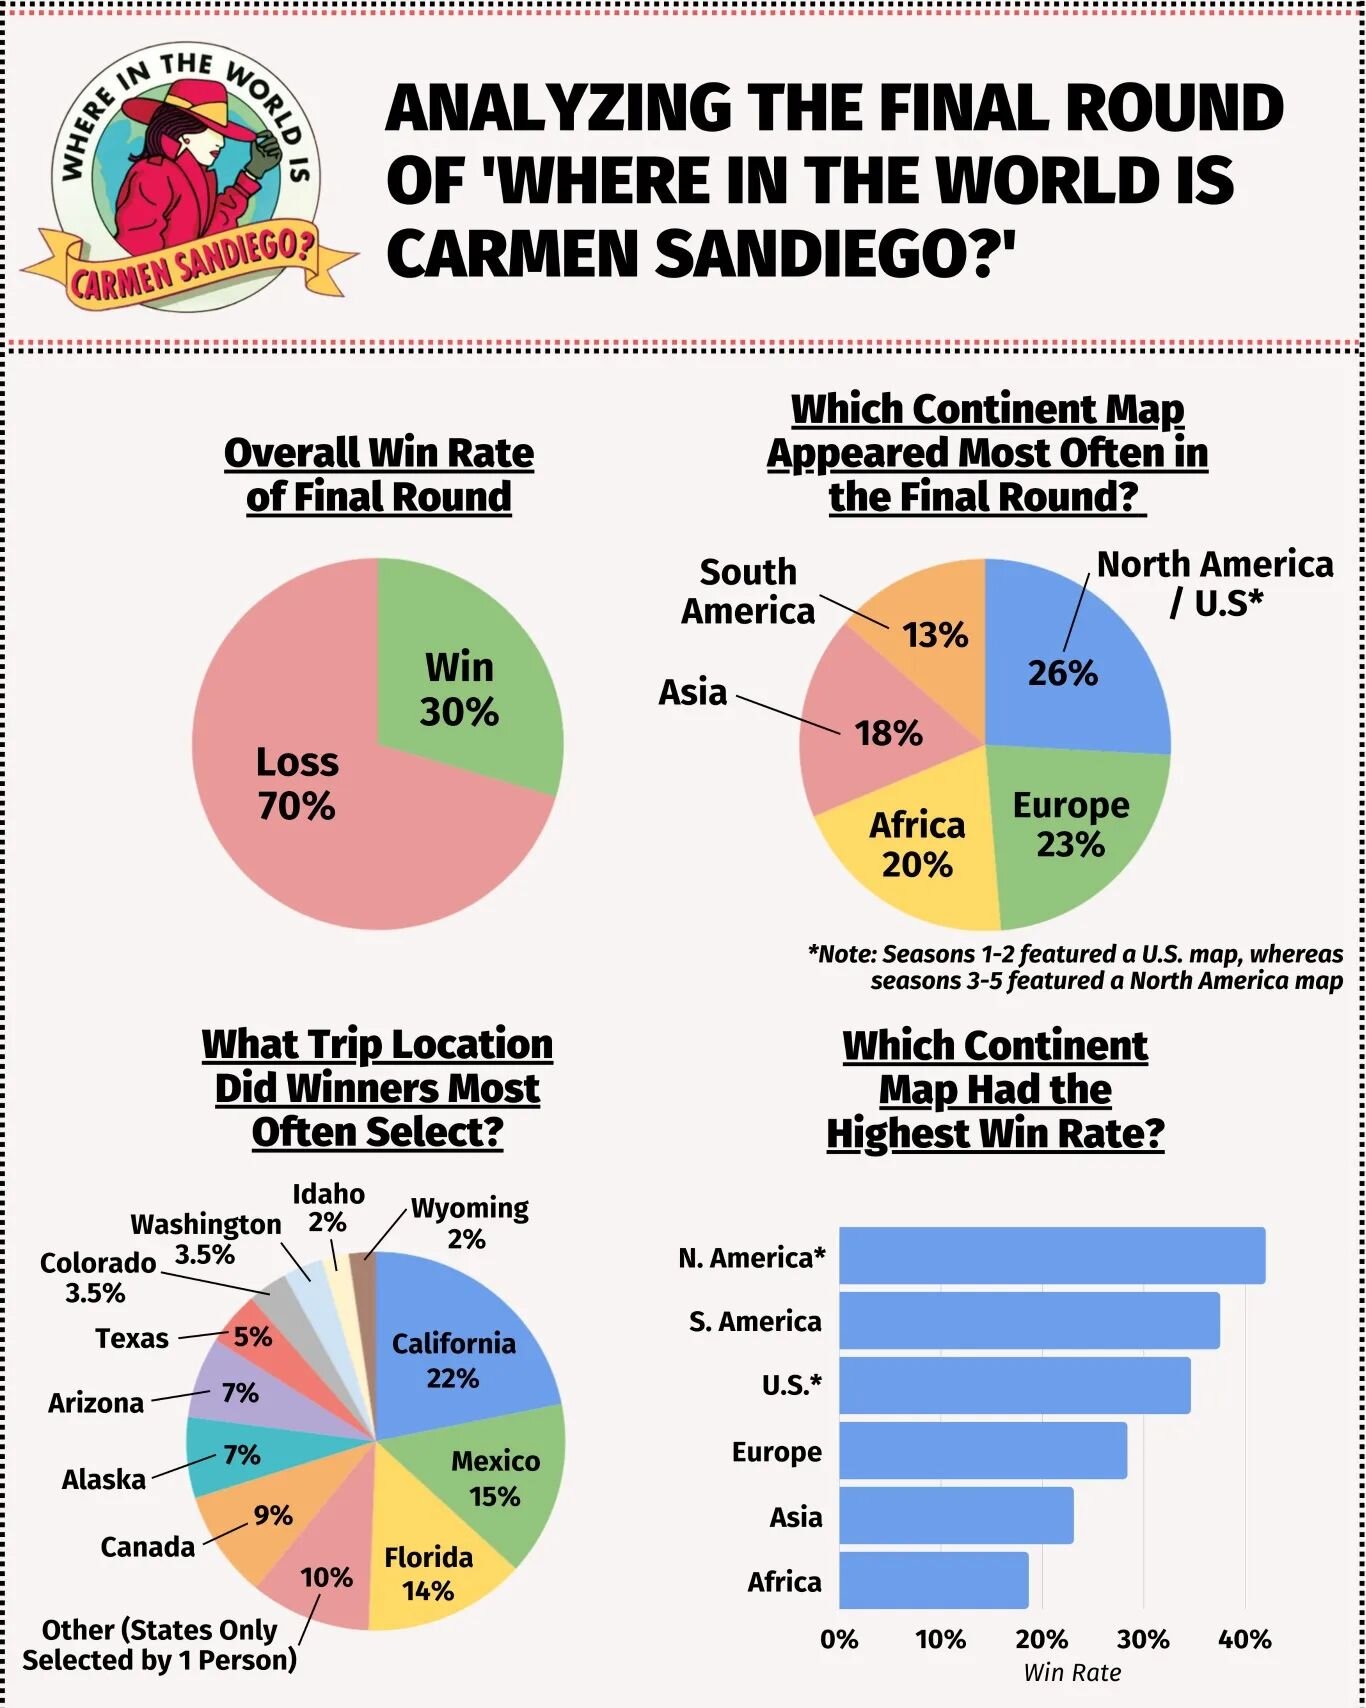 Dork confession time: I have been wanting to make this graph for ages! I loved watching 'Where in the World is Carmen Sandiego?' on PBS growing up, and I always thought the final round in particular (where the final contestant runs around putting mar